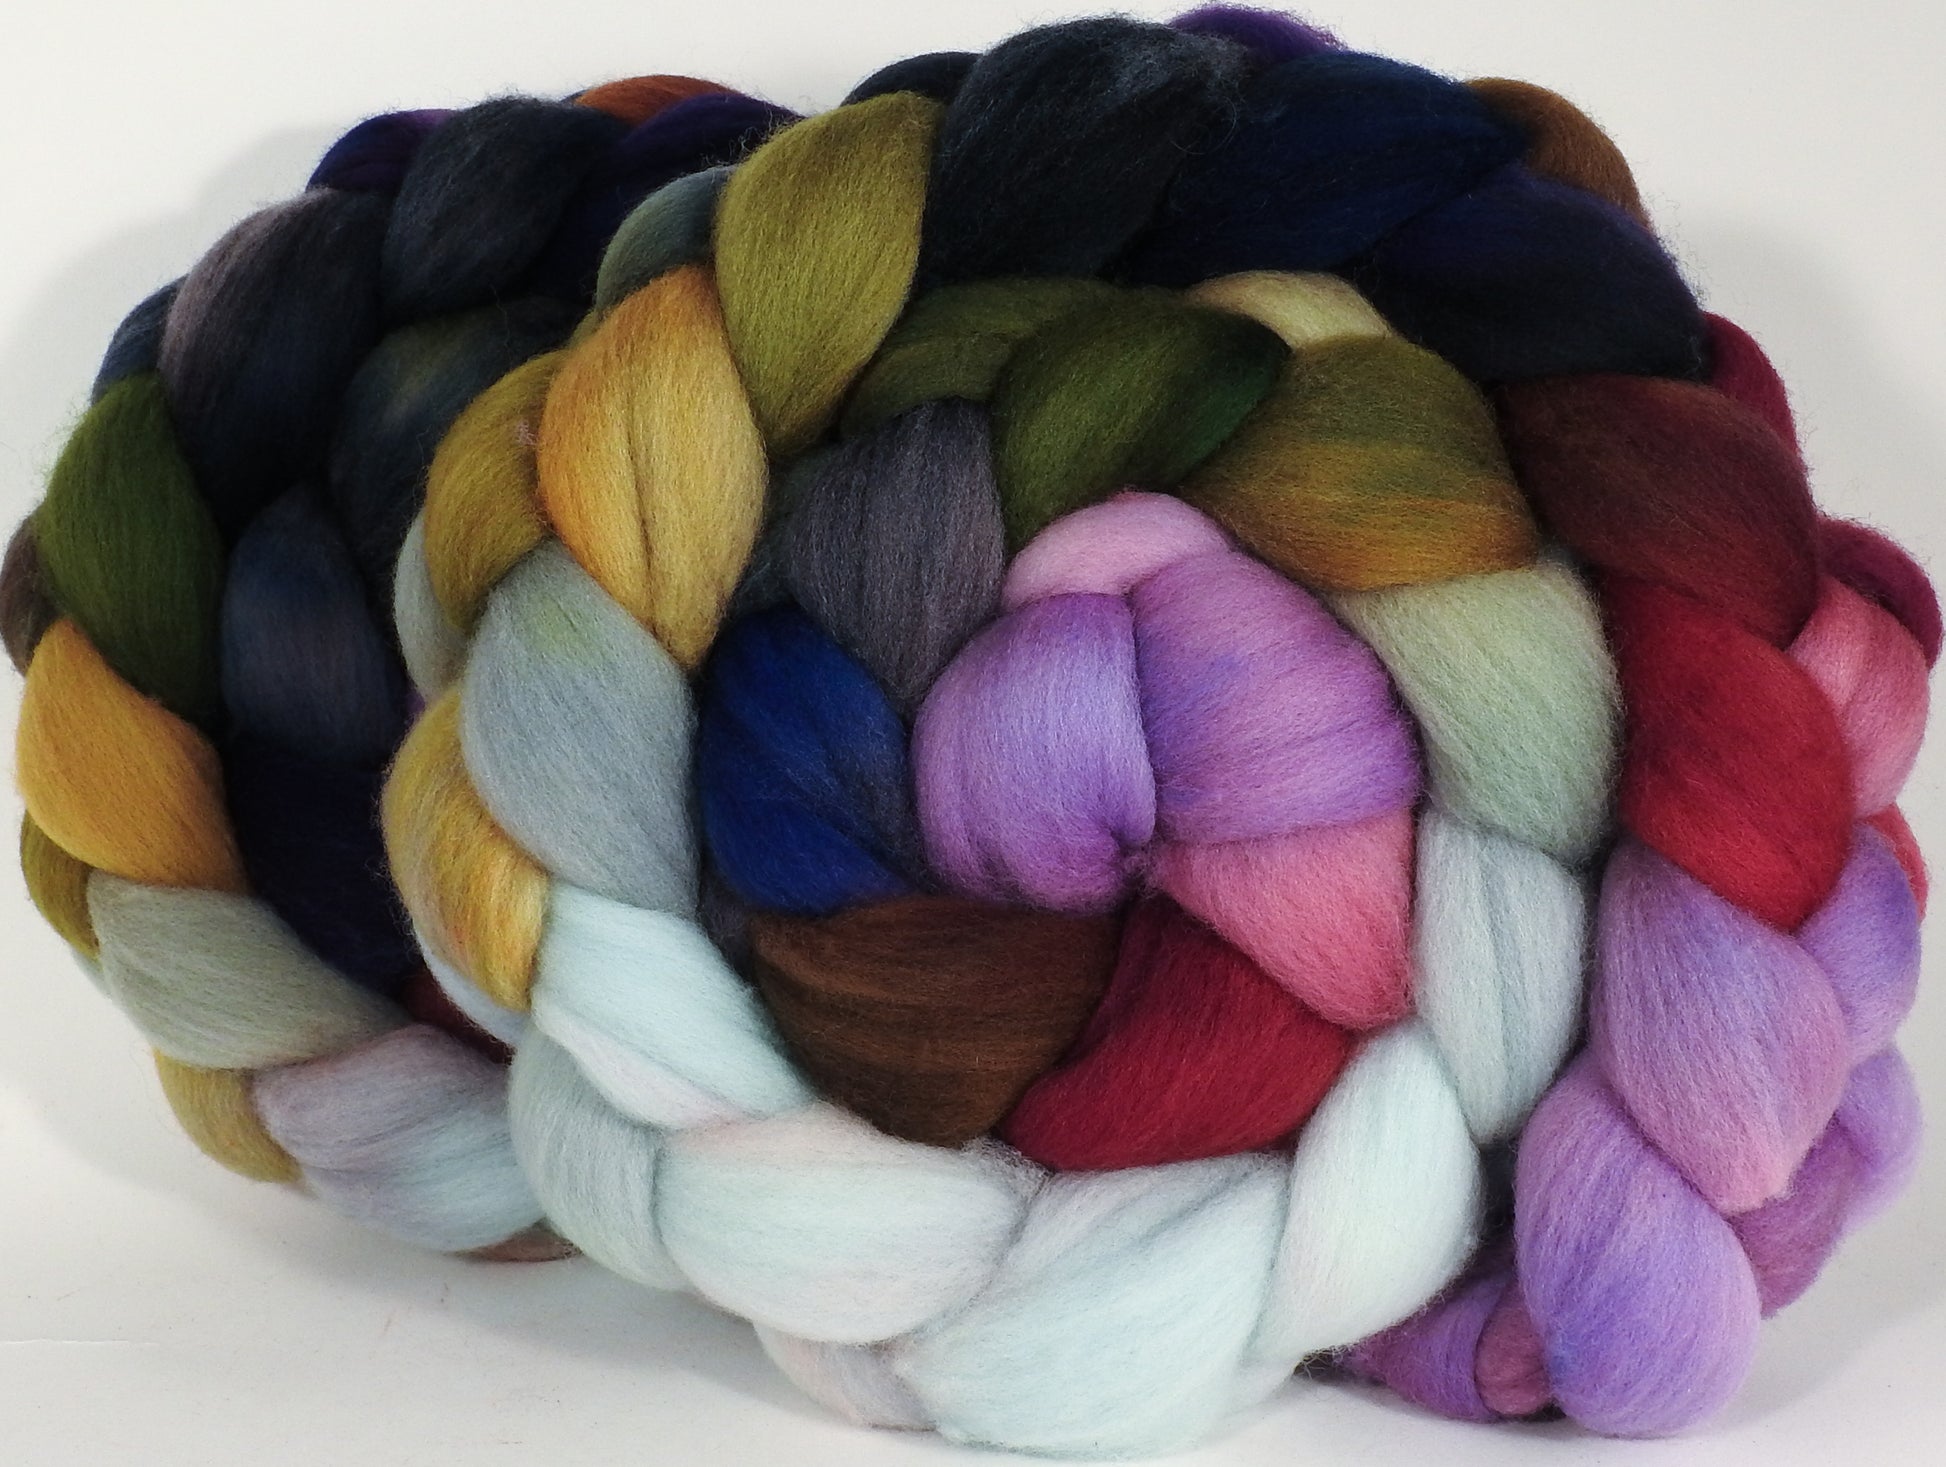 Hand dyed top for spinning - Cabbages & Kings - (5.2 oz.) Organic Polwarth - Inglenook Fibers